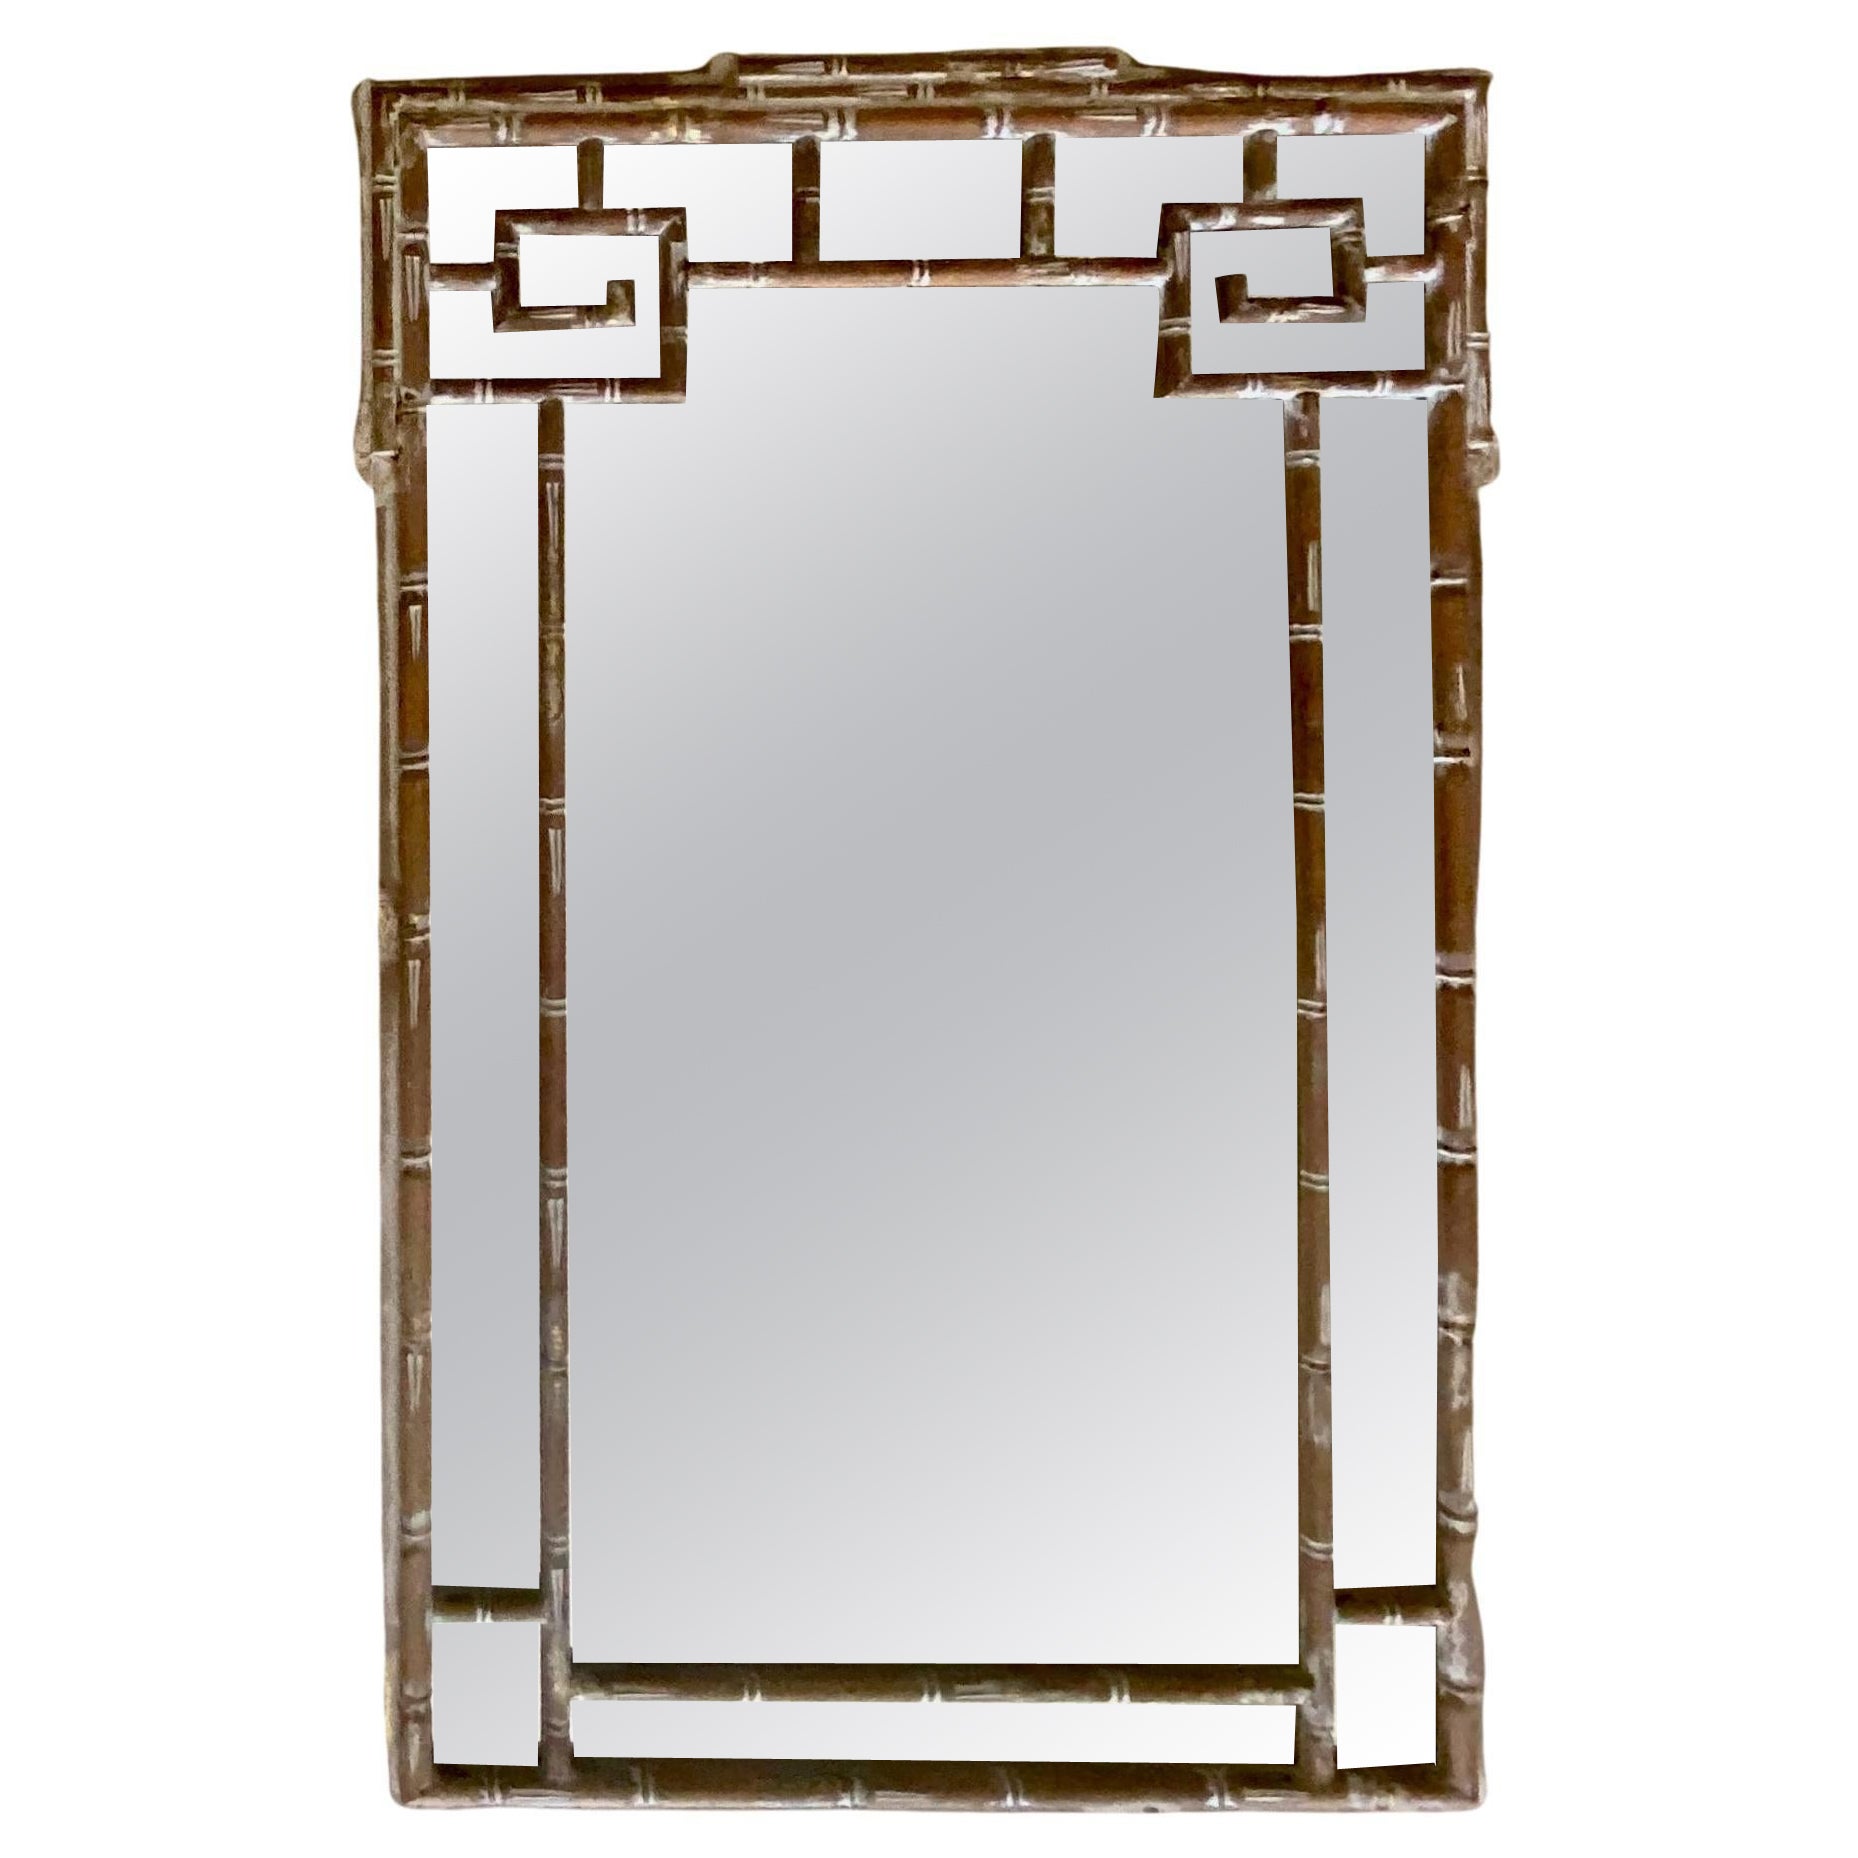  Italian Carved Wood Greek Key Faux Bamboo Wall Mirror For Sale